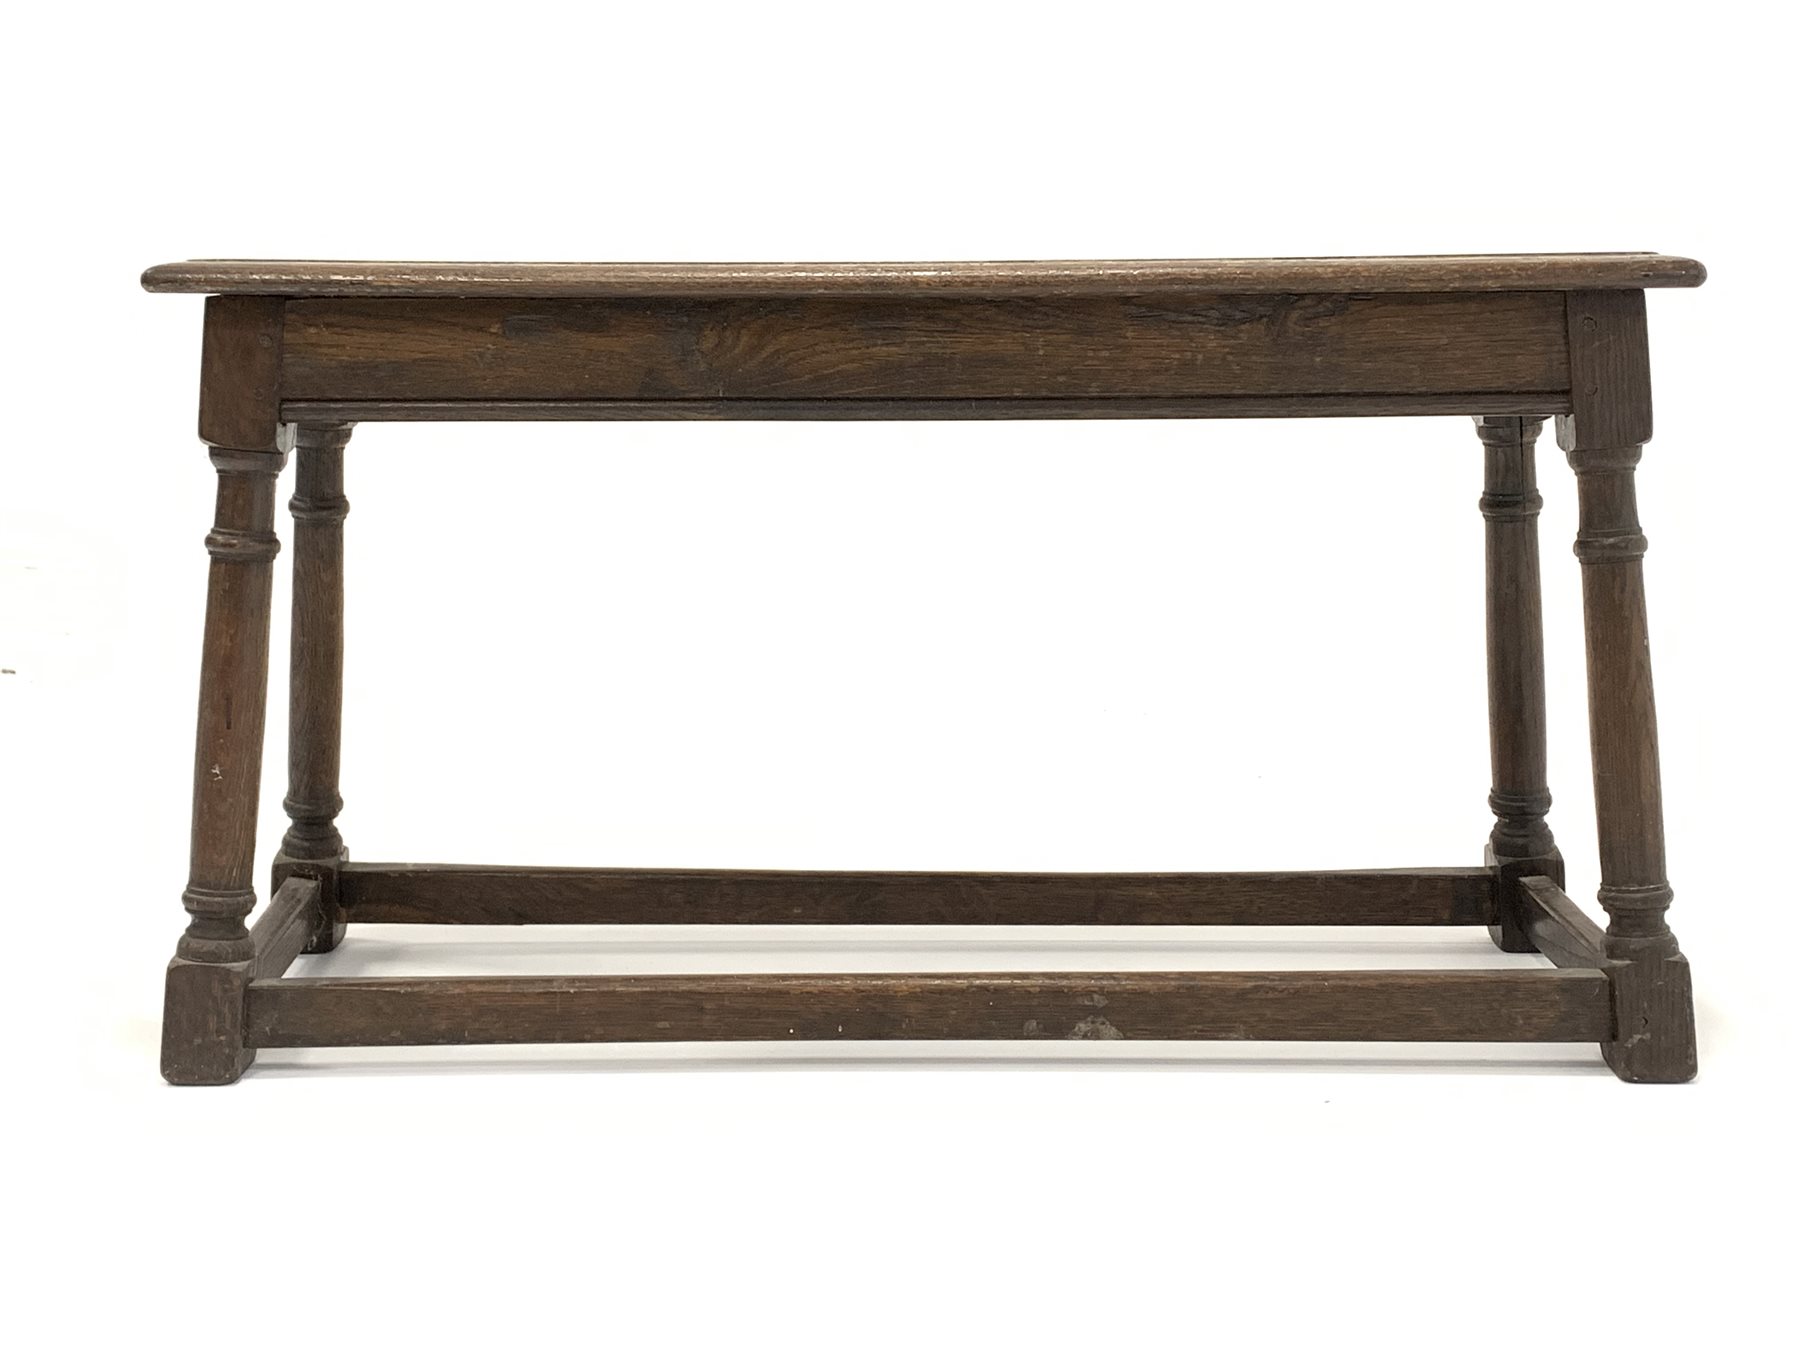 18th century style long joint stool, moulded top raised on ring turned and block supports - Image 2 of 2